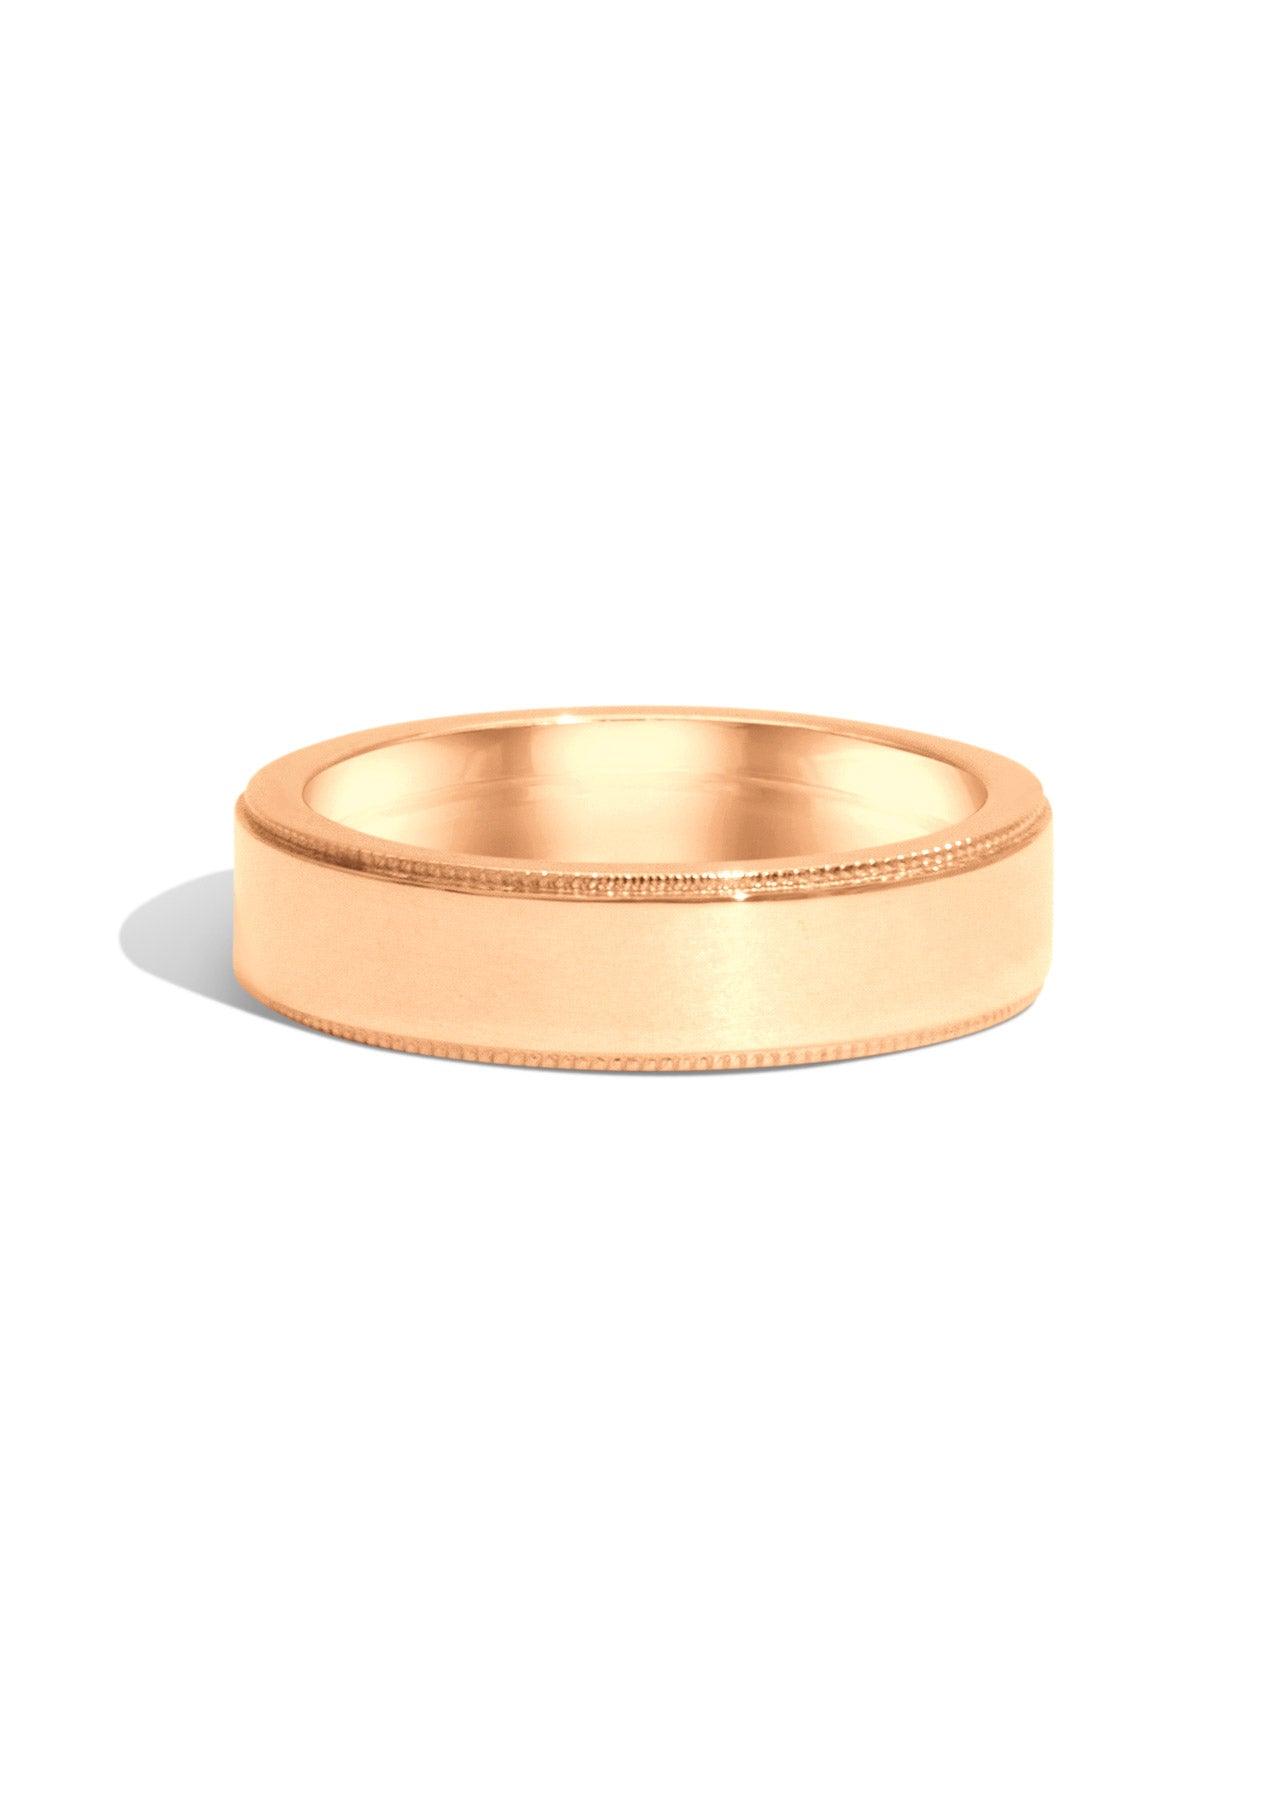 The Epoch Rose Gold Band